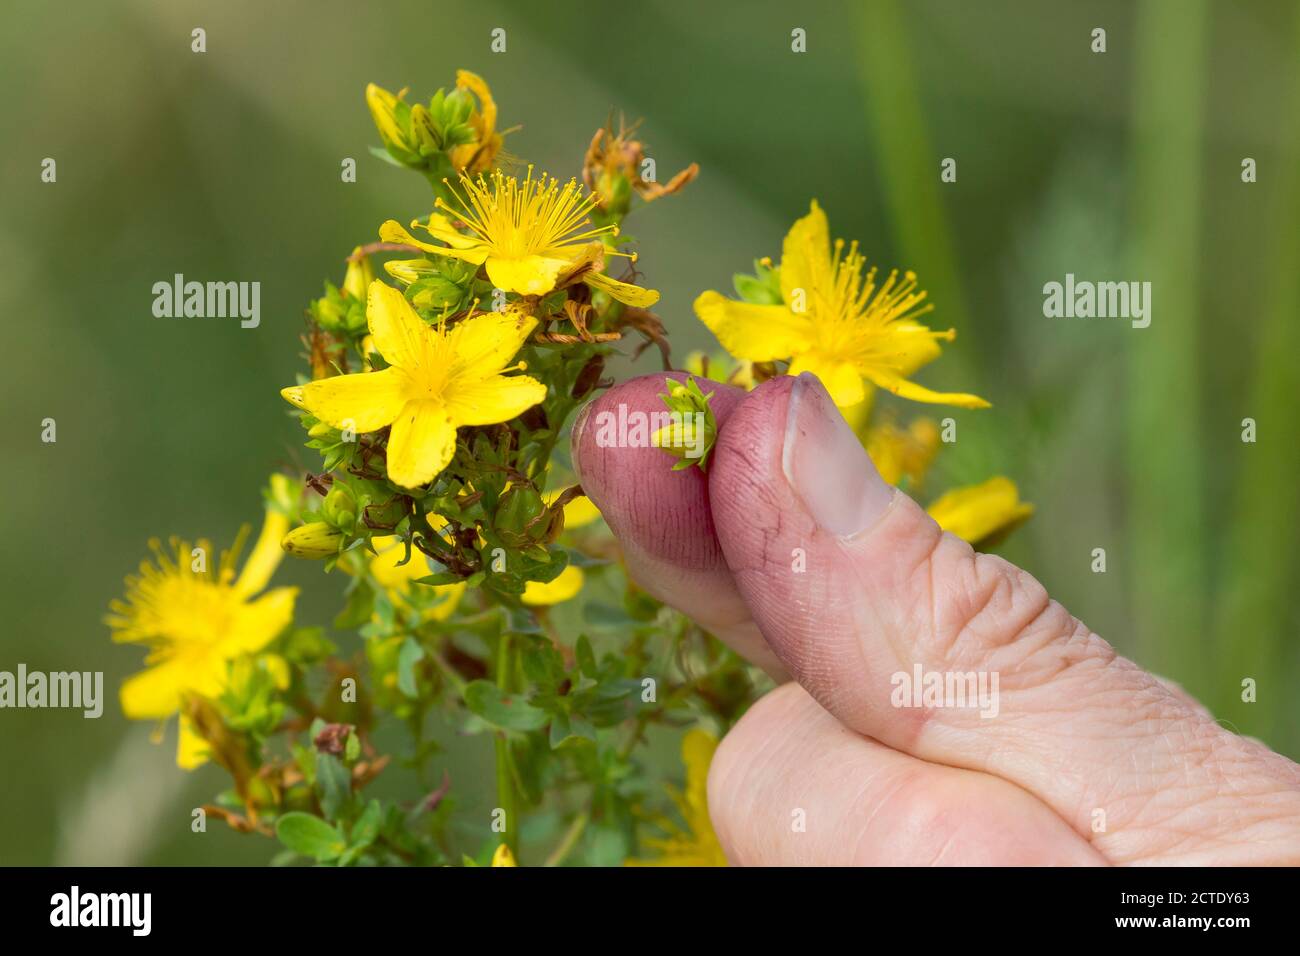 Common St Johns-wort, perforate St Johns-wort, klamath weed, St. Johns-wort (Hypericum perforatum), red color of a grinded flower, Germany Stock Photo